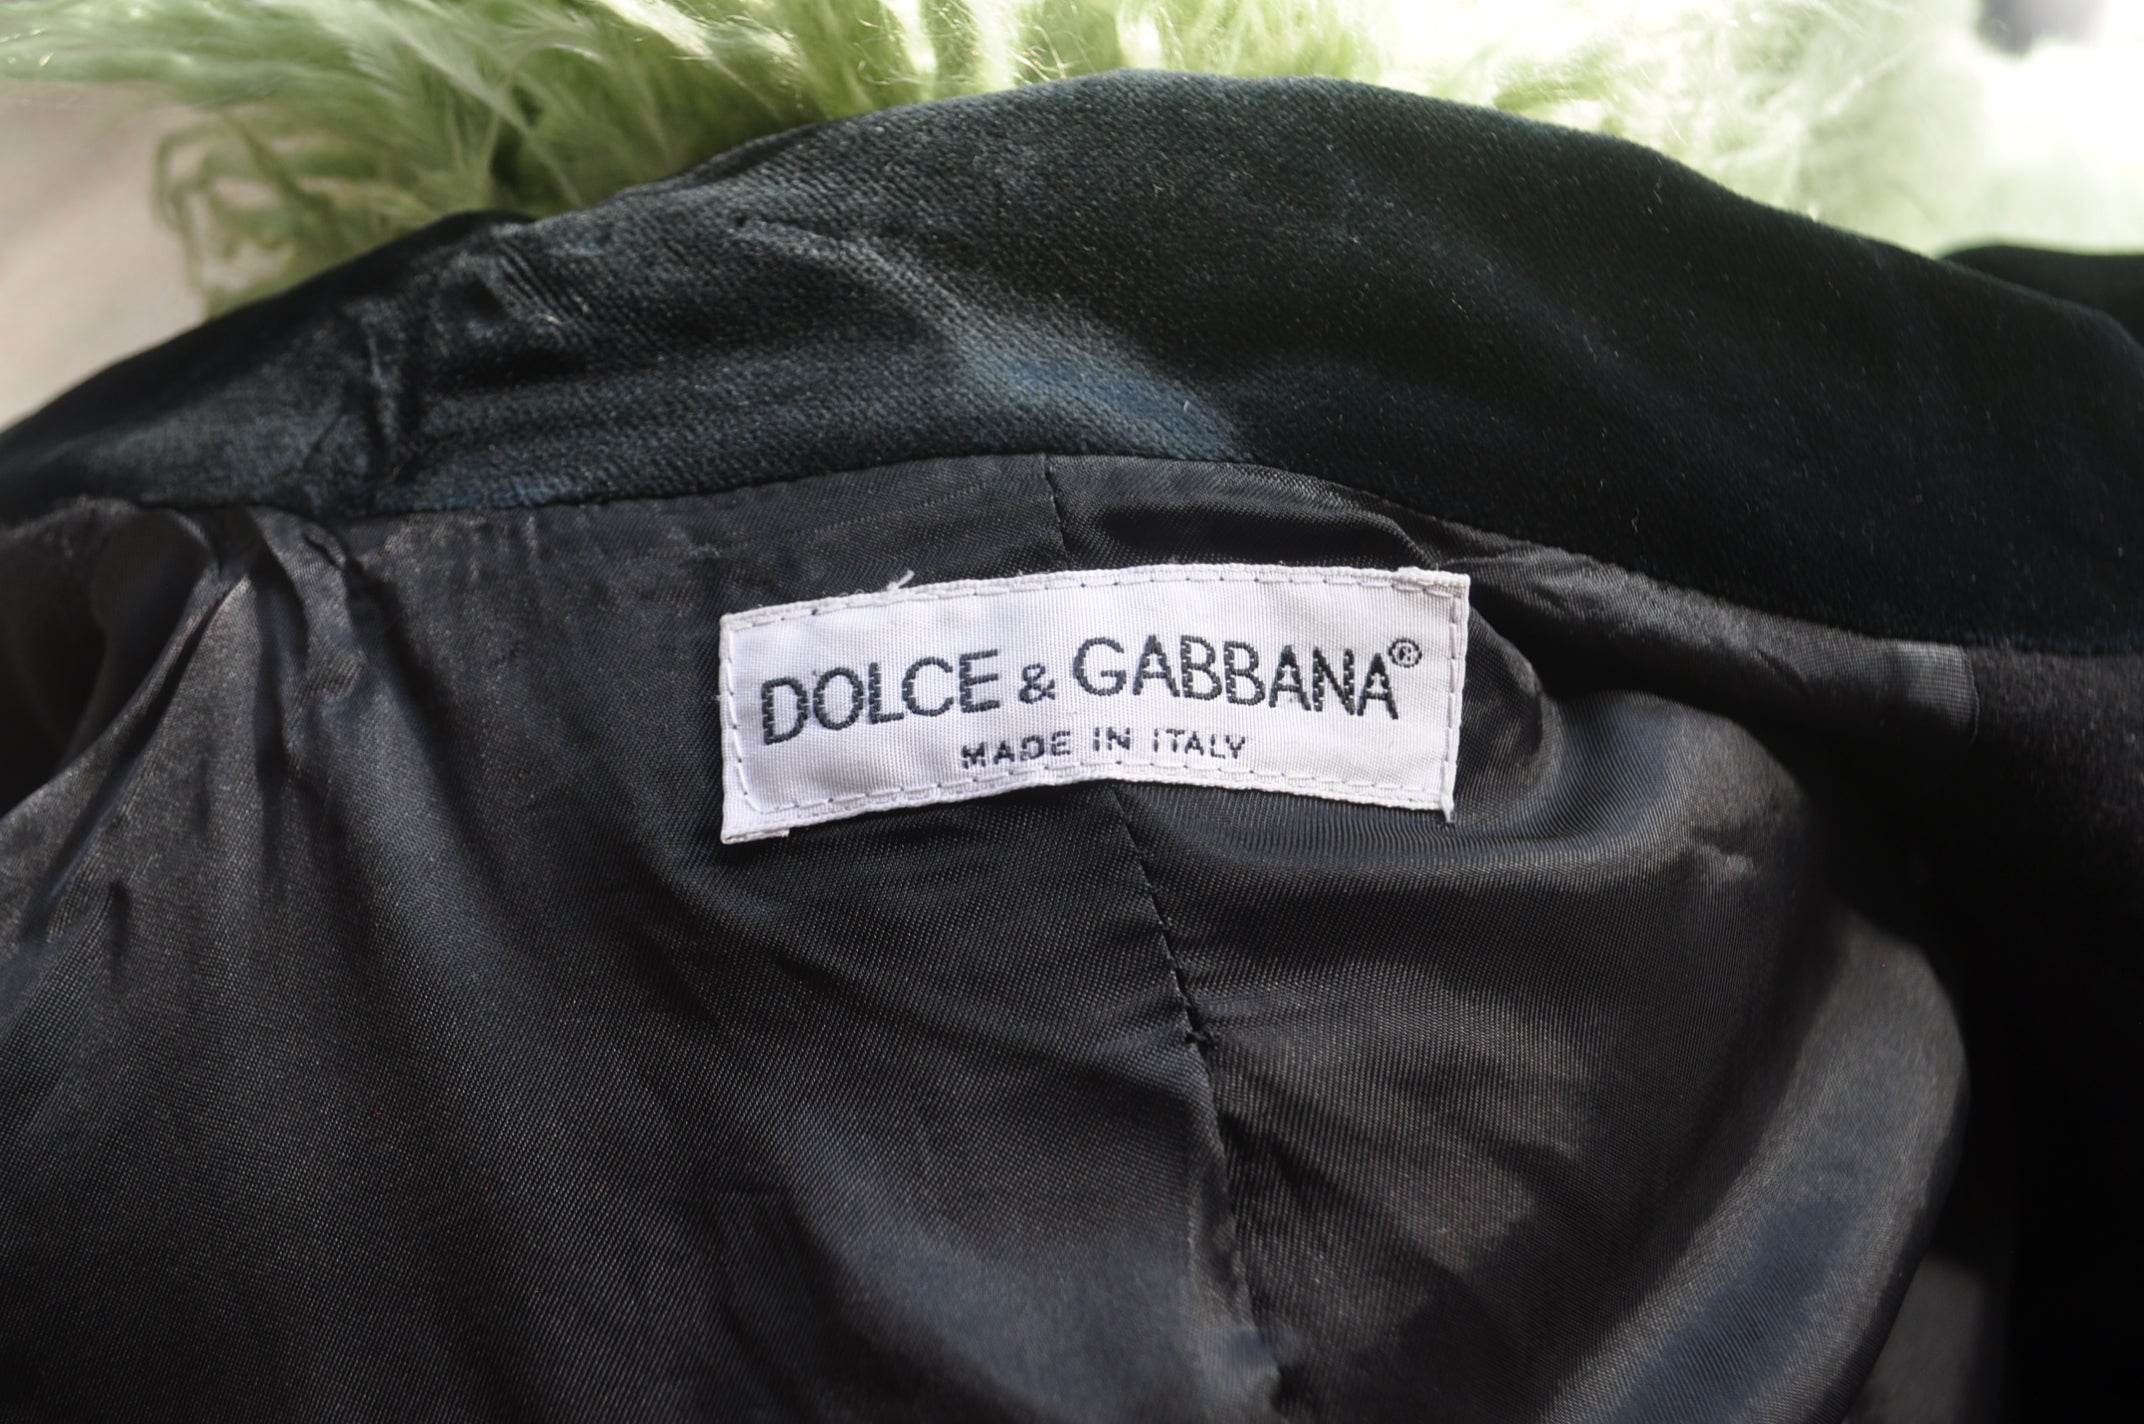 Dolce &Gabbana jacket from the 80s – Vintage Le Monde